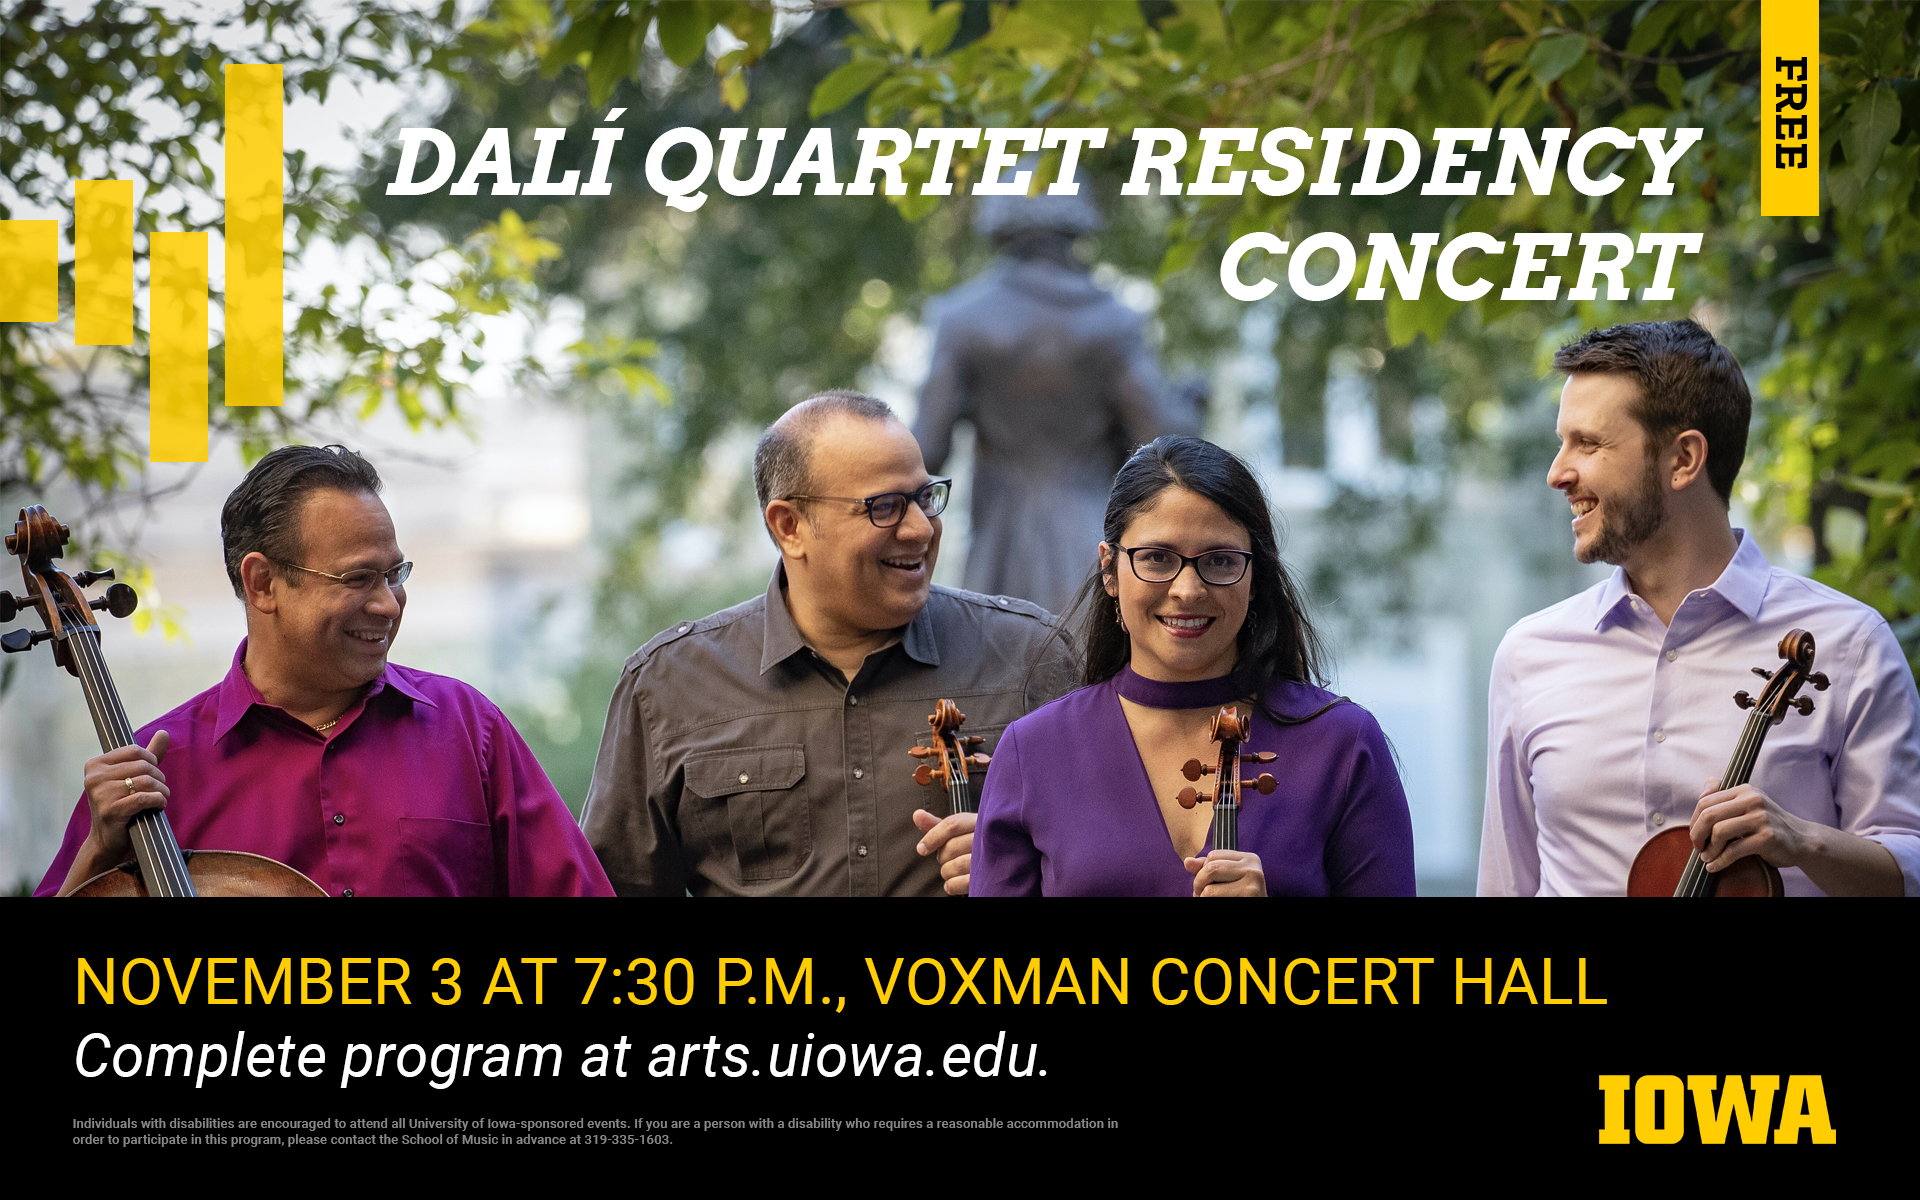 Photo of the members of the Dalí Quartet. Dalí Quartet Residency Concert. November 3rd at 7:30pm in the Voxman Concert Hall. Complete program available at arts.uiowa.edu. Free.